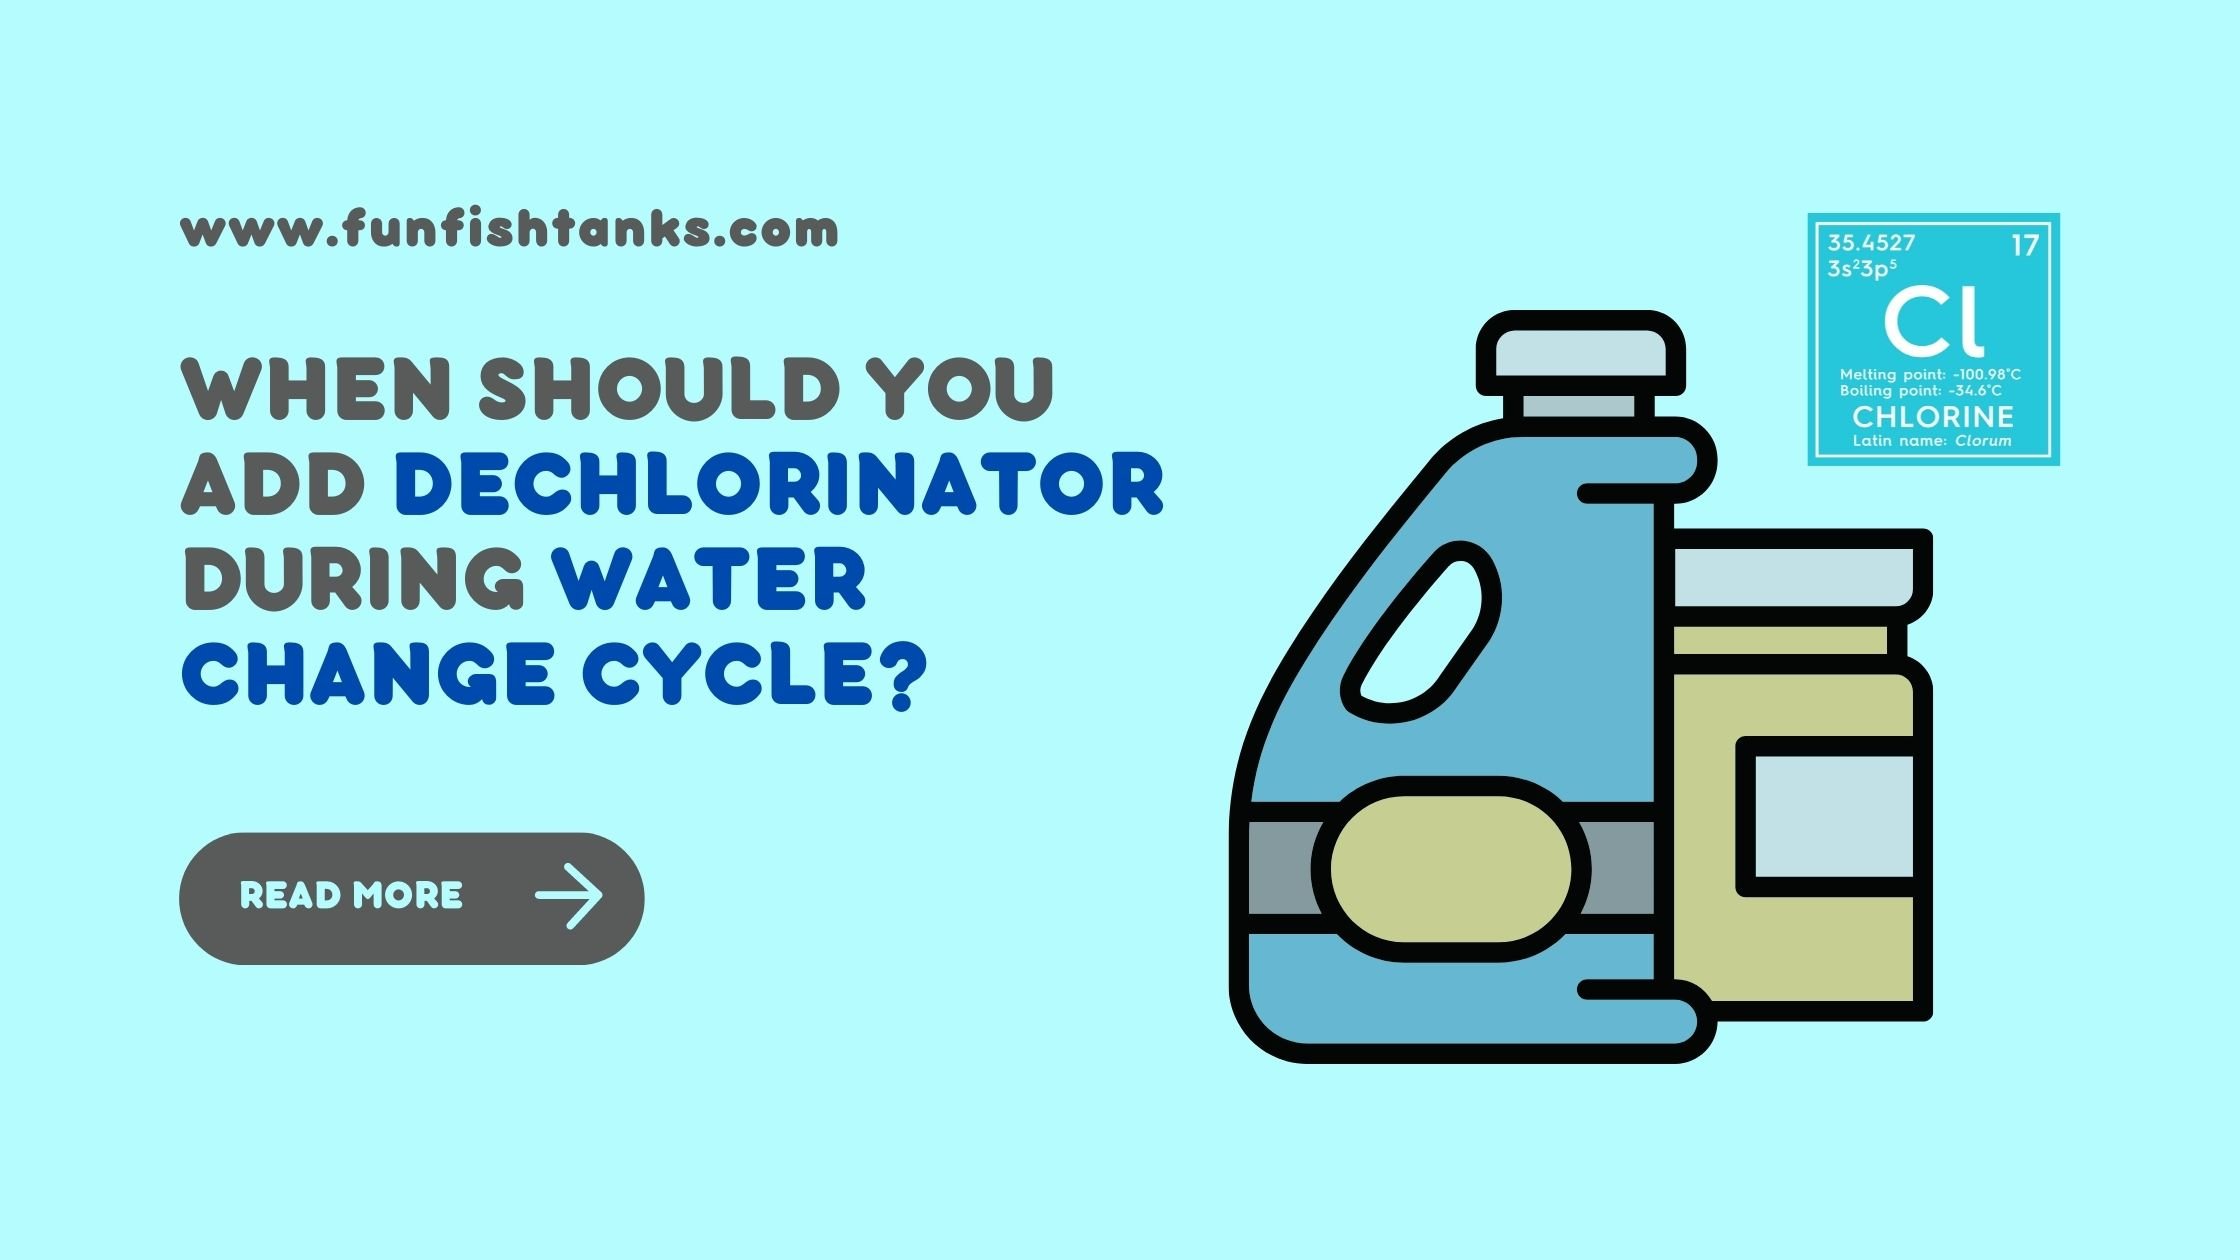 When Should you Add Dechlorinator During Water Change Cycle? 